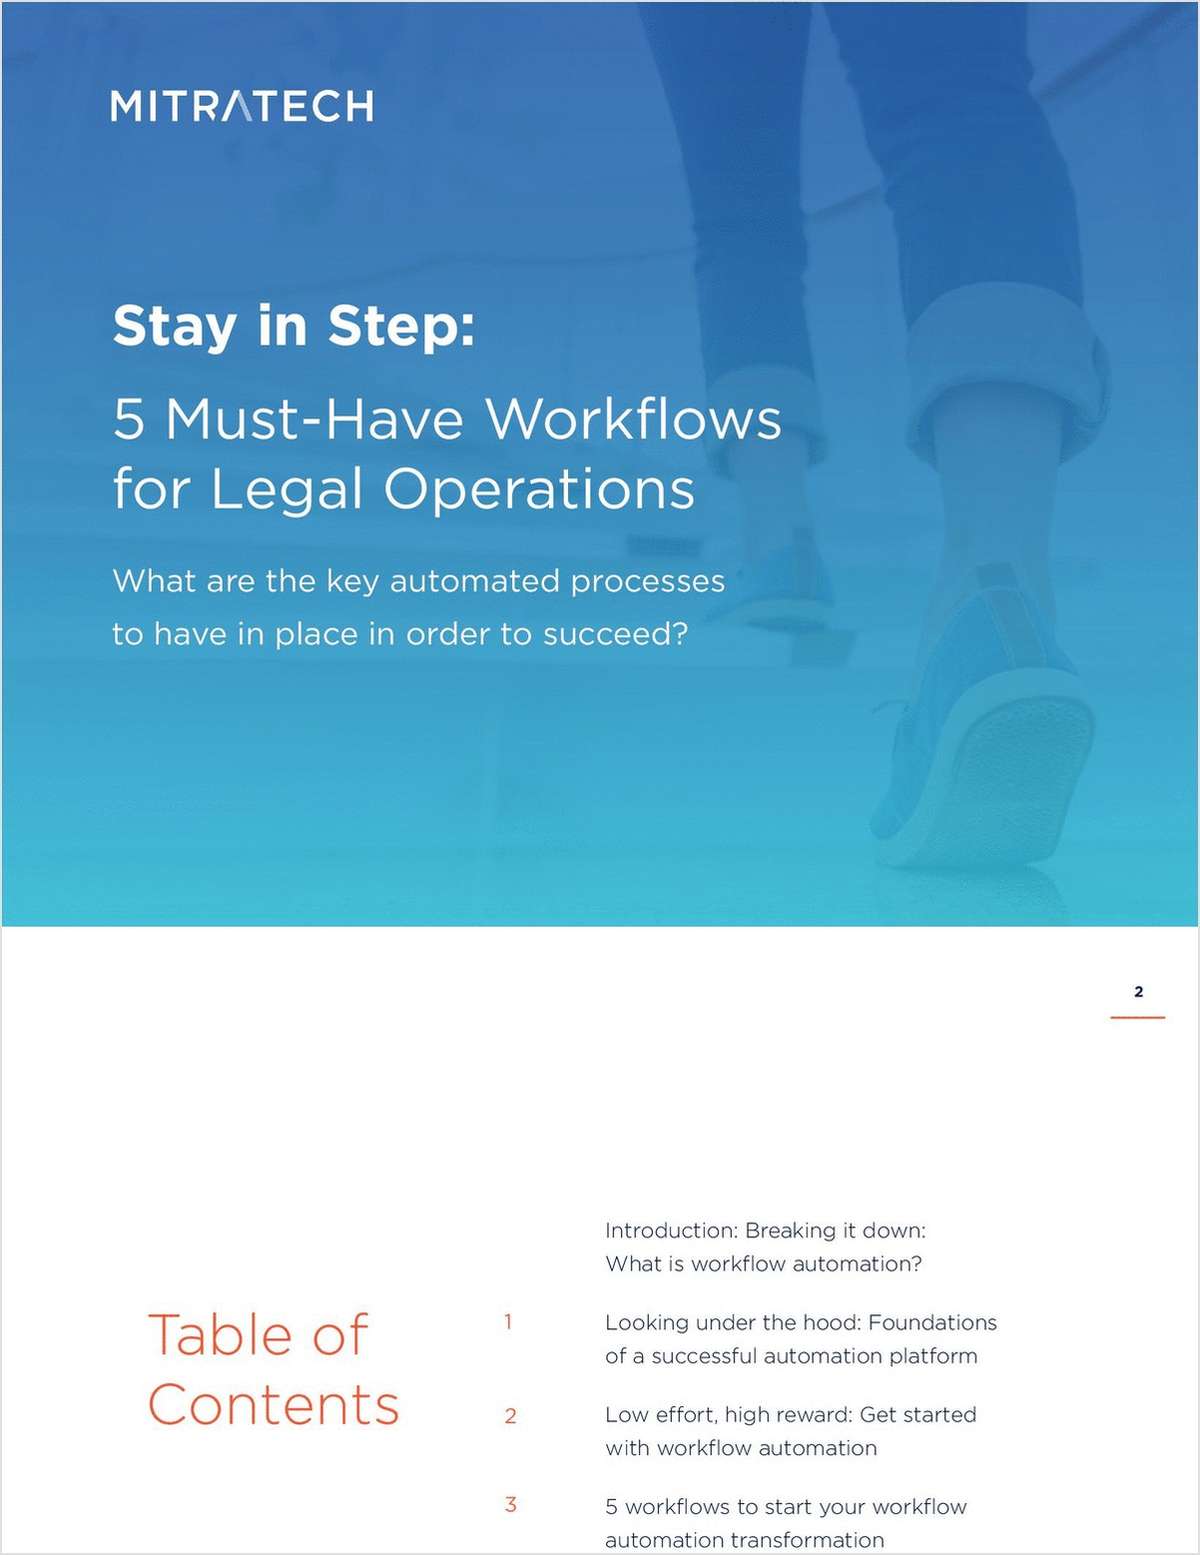 Stay in Step: 5 Must-Have Workflows